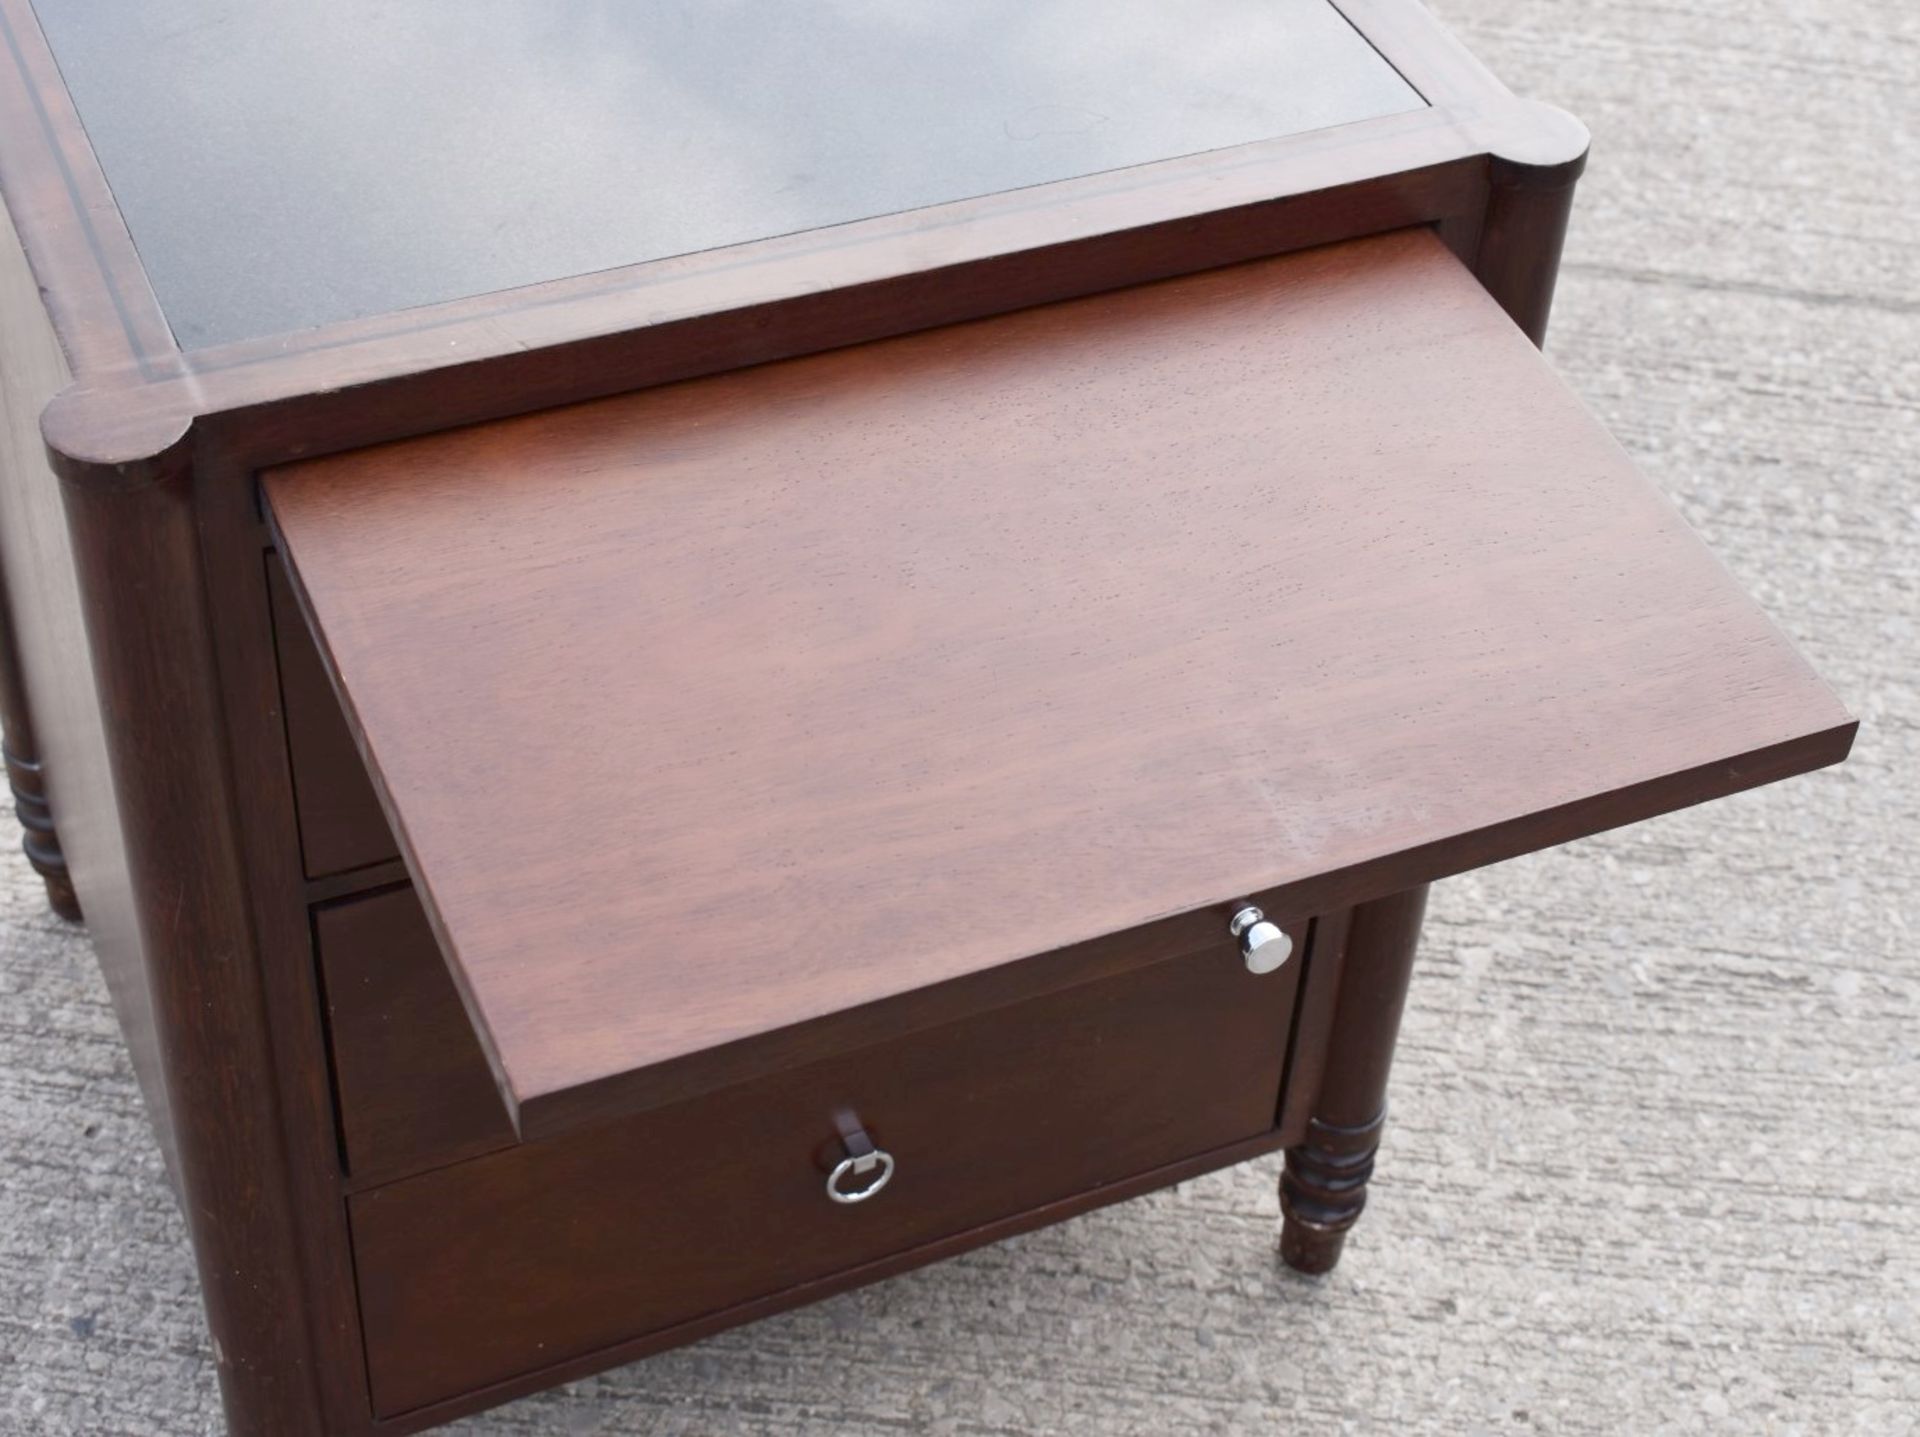 1 x CHANNELS Classically Styled Designer Solid Wood End Table with Pull-Out Tray, 1-Drawer Storage - Image 2 of 5